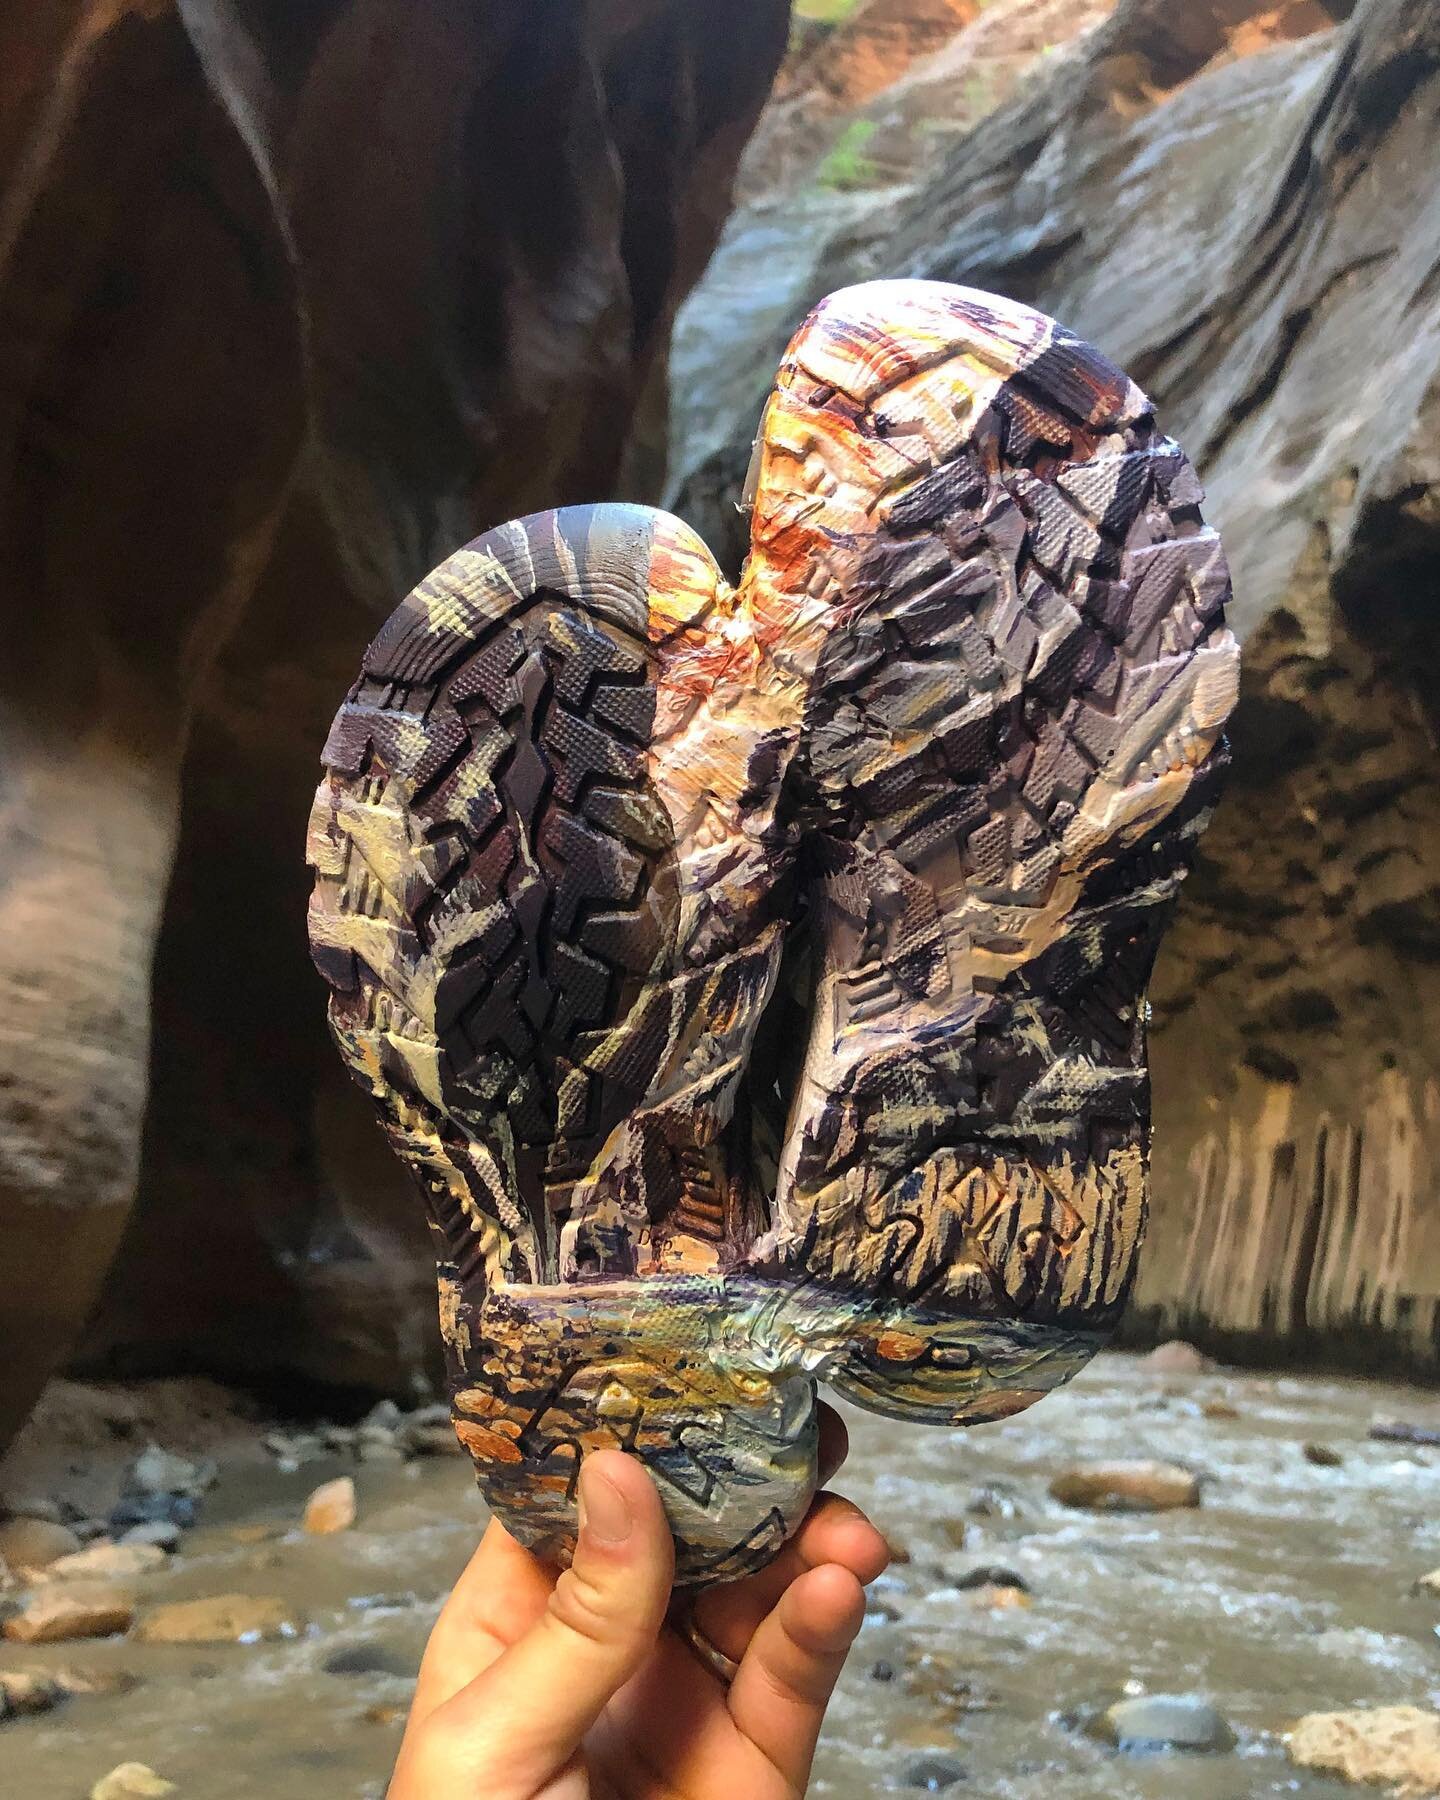 More from Zion NP art residency two years ago! &ldquo;Kids Size 11 Narrow&rdquo; acrylic on kid sandals found at the Narrows trailhead. This painting was my donation to the park but if you want a copy of your own I have a recycled framed print for sa